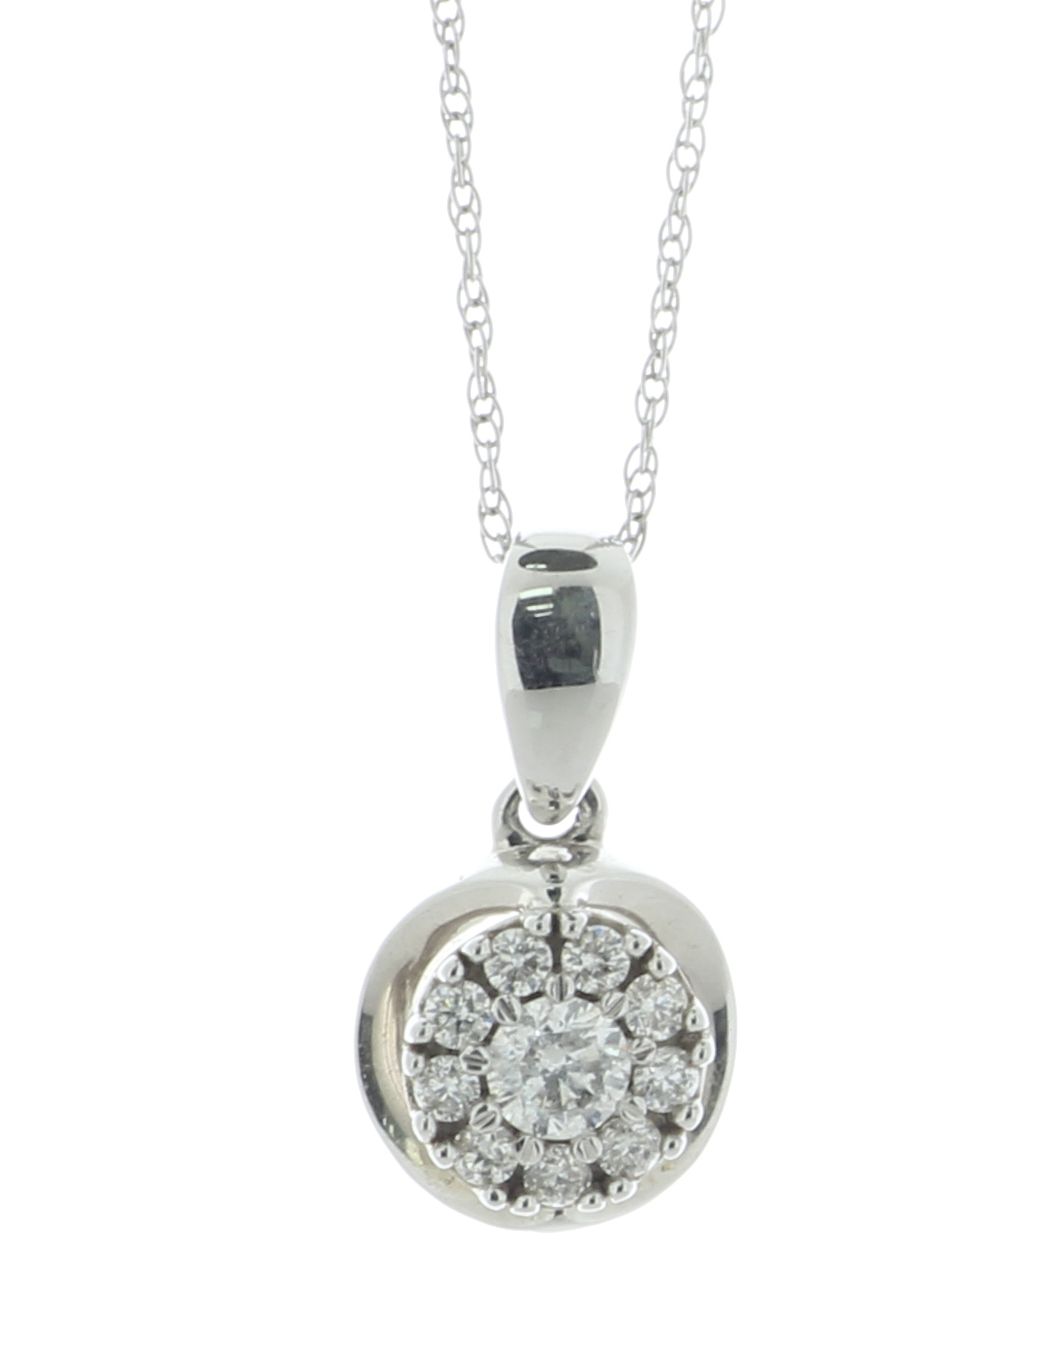 10ct White Gold Diamond Cluster Pendant and 18"" Chain 0.25 Carats - Image 2 of 4